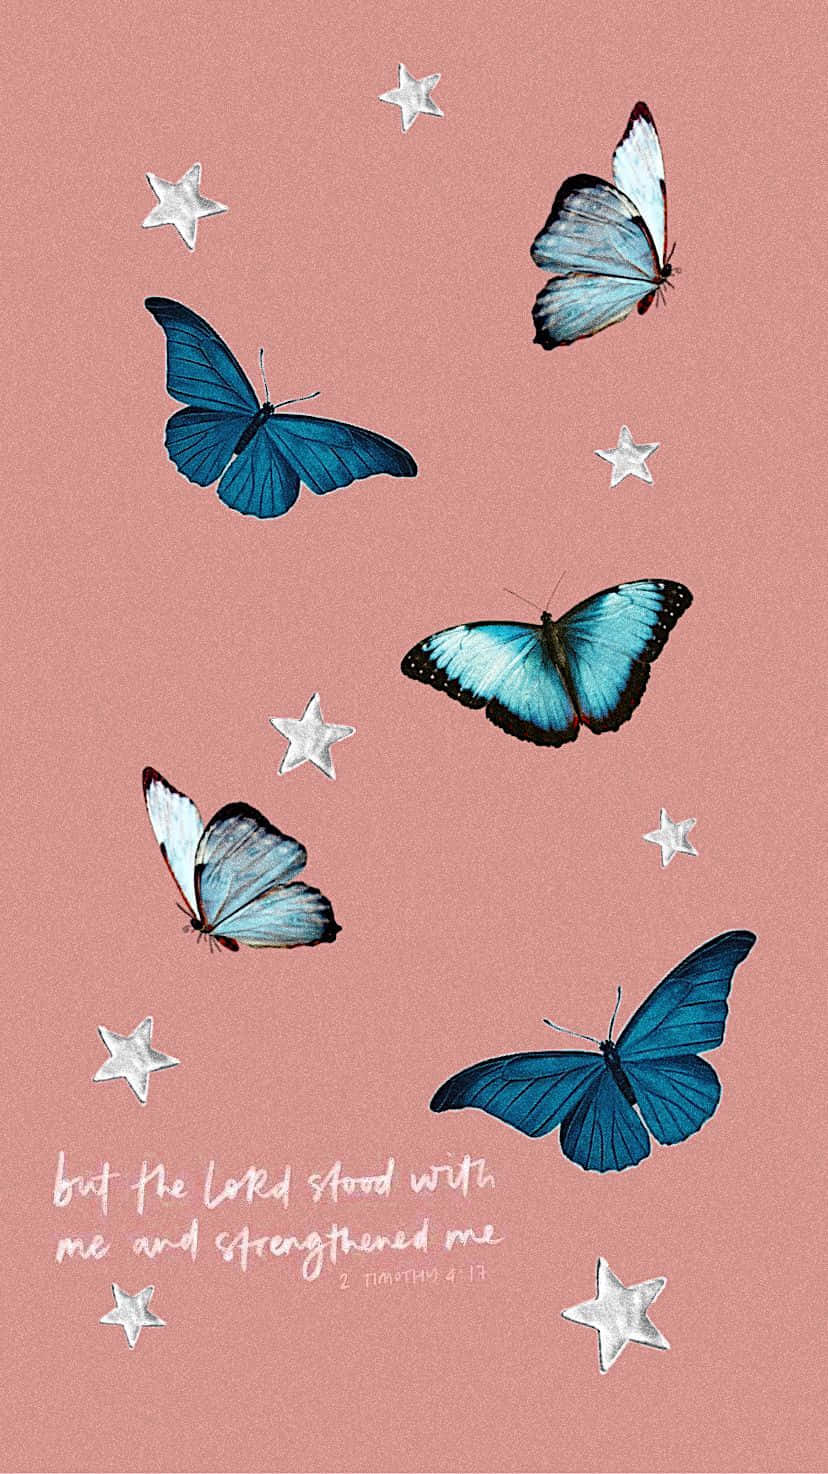 Blue butterflies on a pink background with white stars and a verse from the Bible. - VSCO